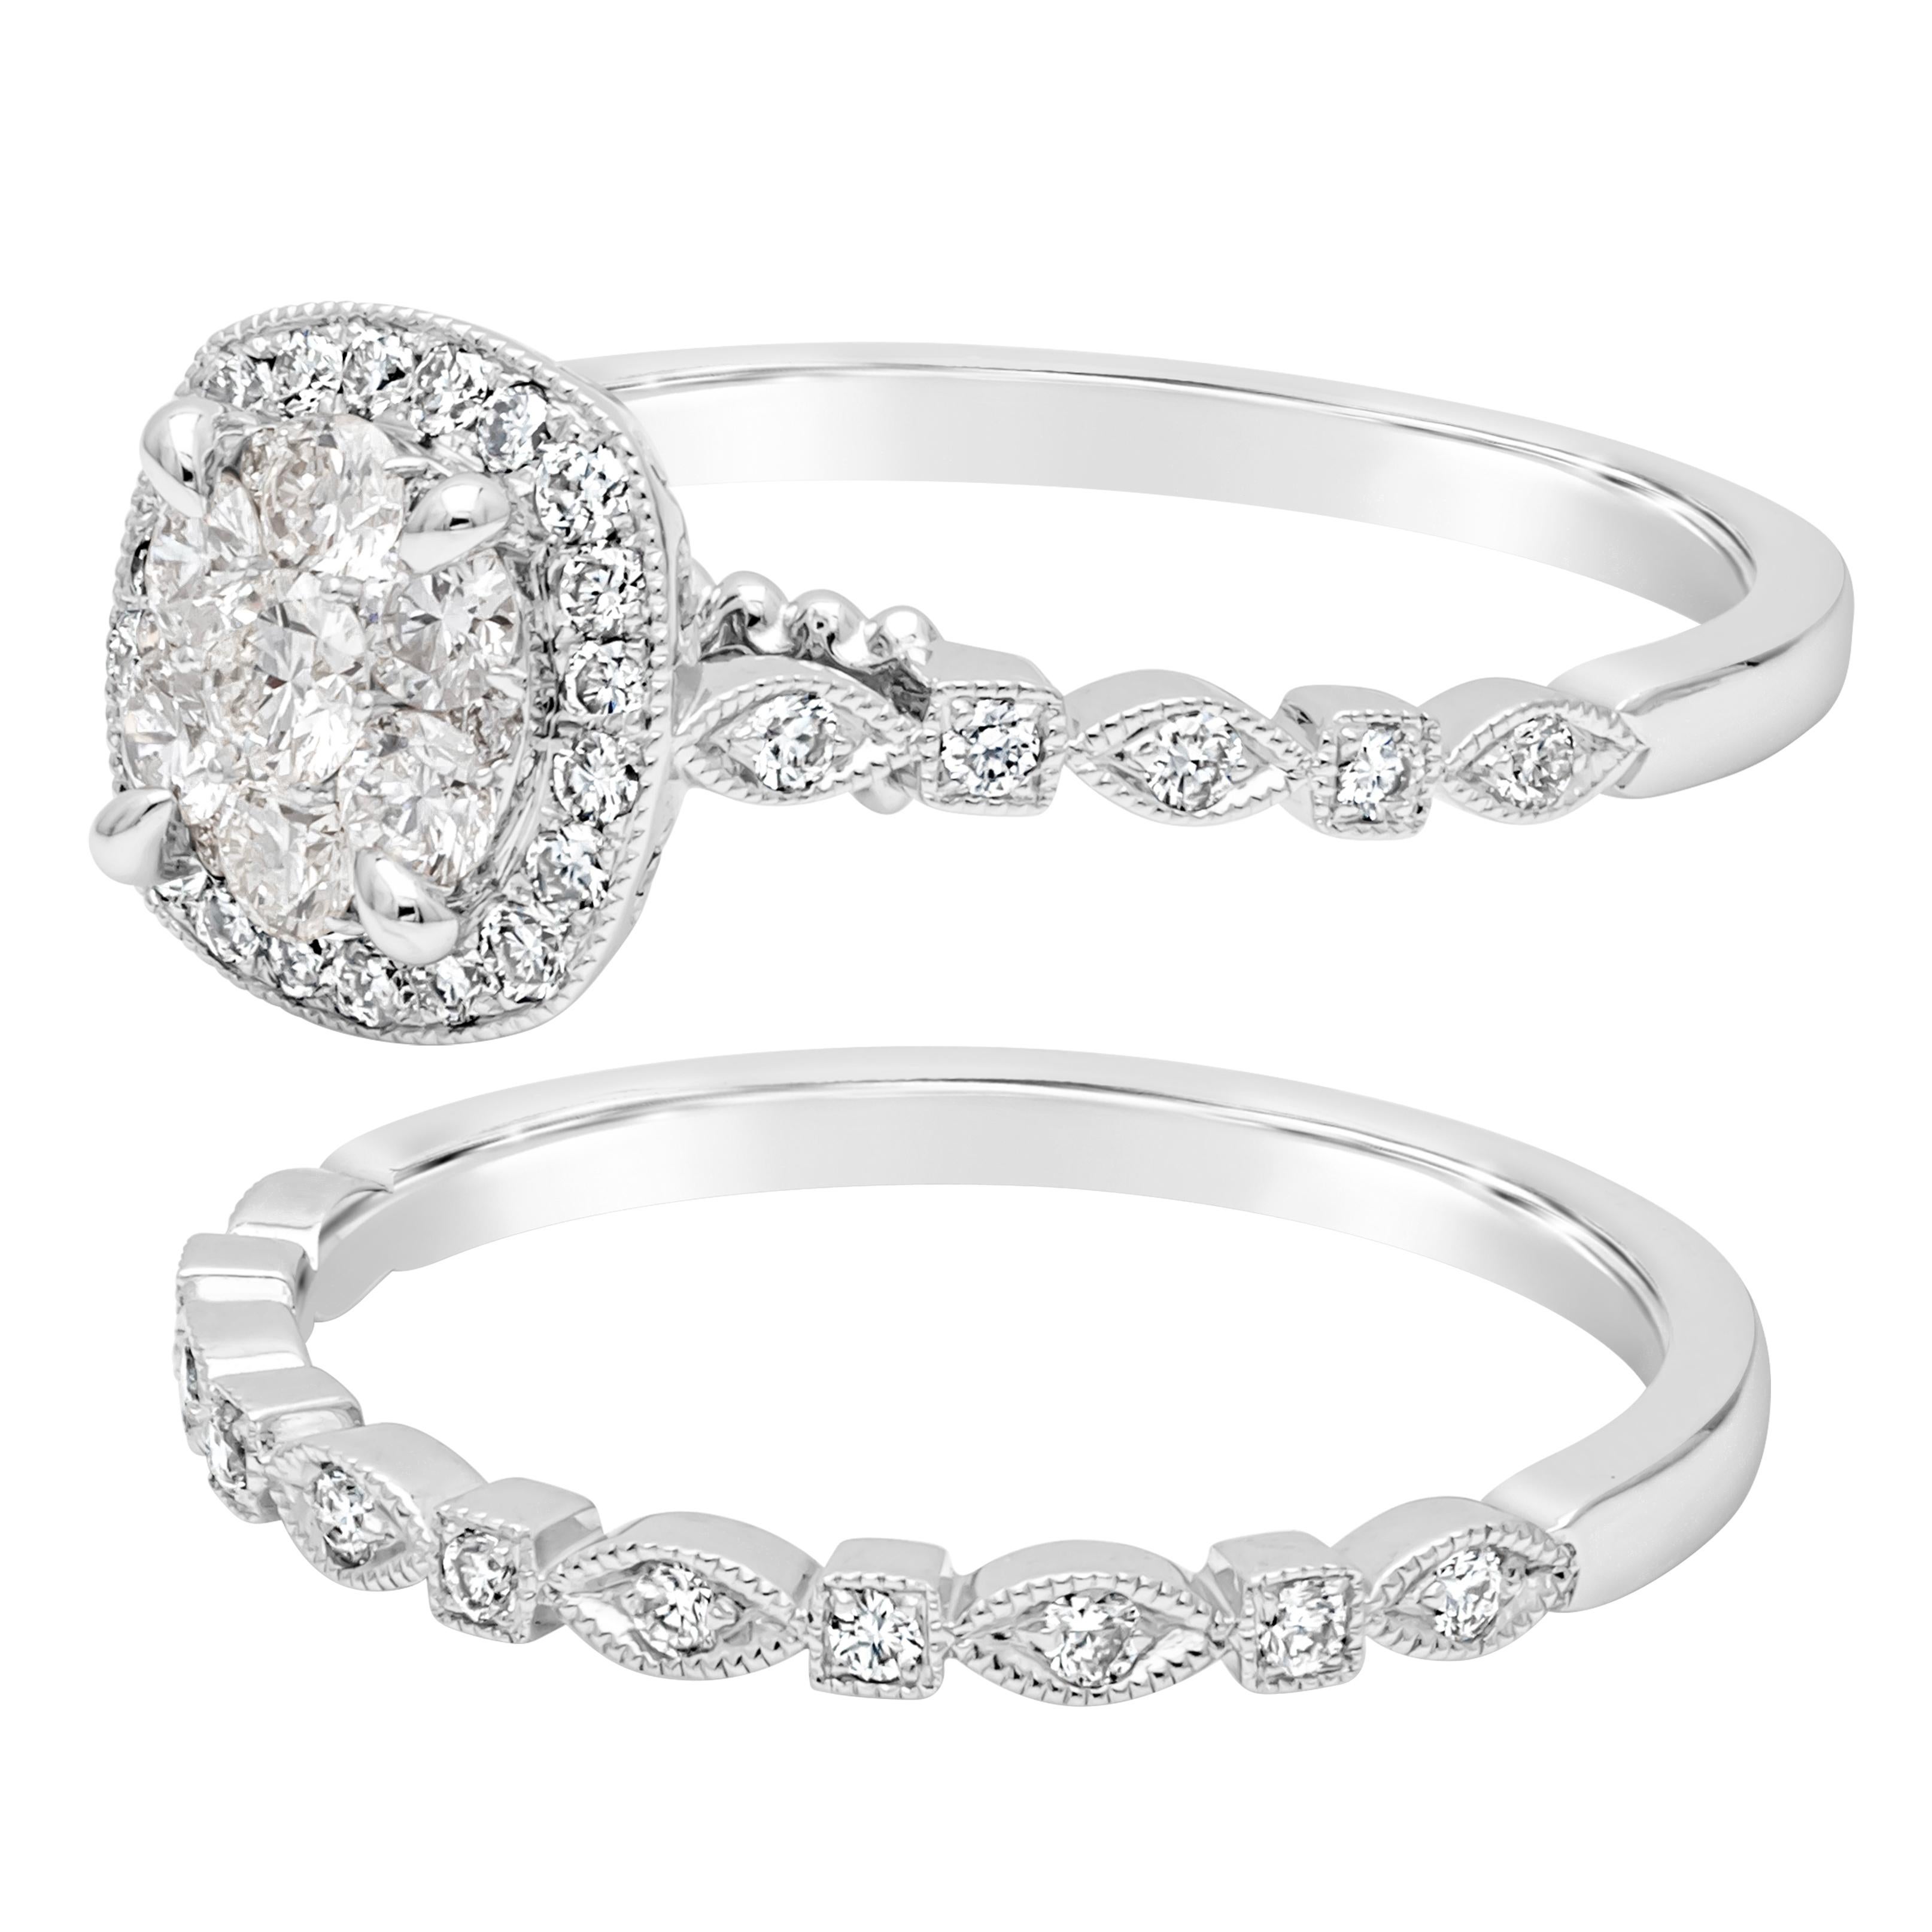 A well crafted engagement ring and wedding band set featuring brilliant round diamonds weighing 0.68 carats total, G-H color and VS-SI in clarity made in 14K White Gold. Engagement ring features brilliant round diamonds forming a cushion cut